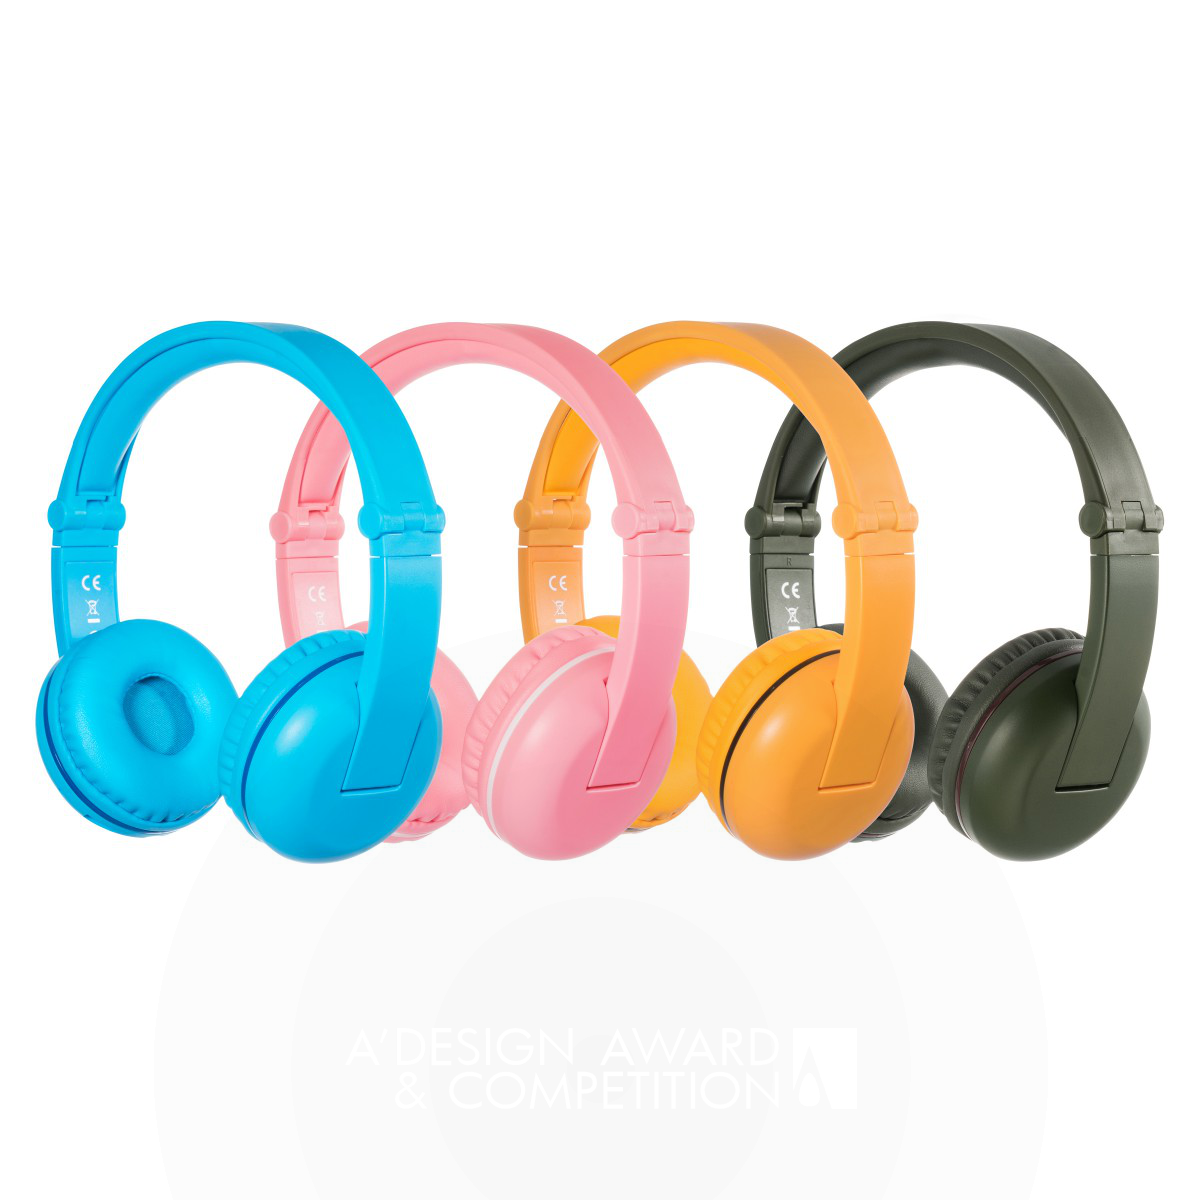 BuddyPhones Play: Enhancing Playfulness and Protecting Young Ears